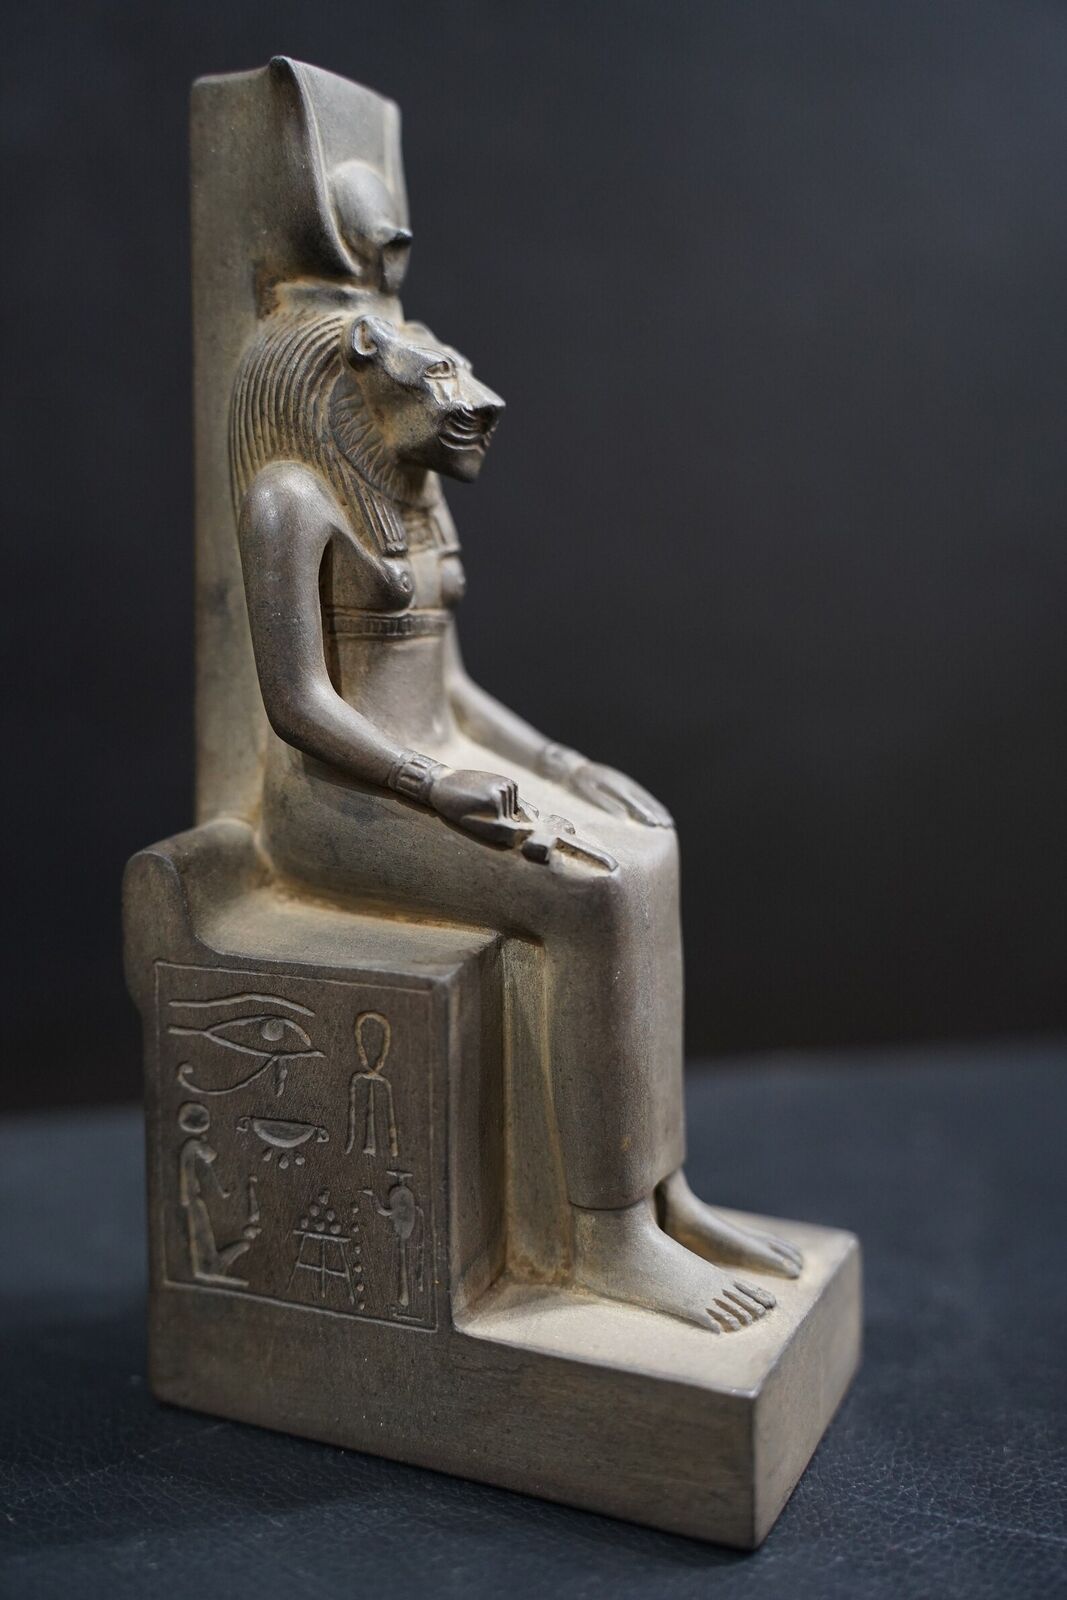 Sekhmet: Egypt's Lioness Goddess of Power and Healing Fury